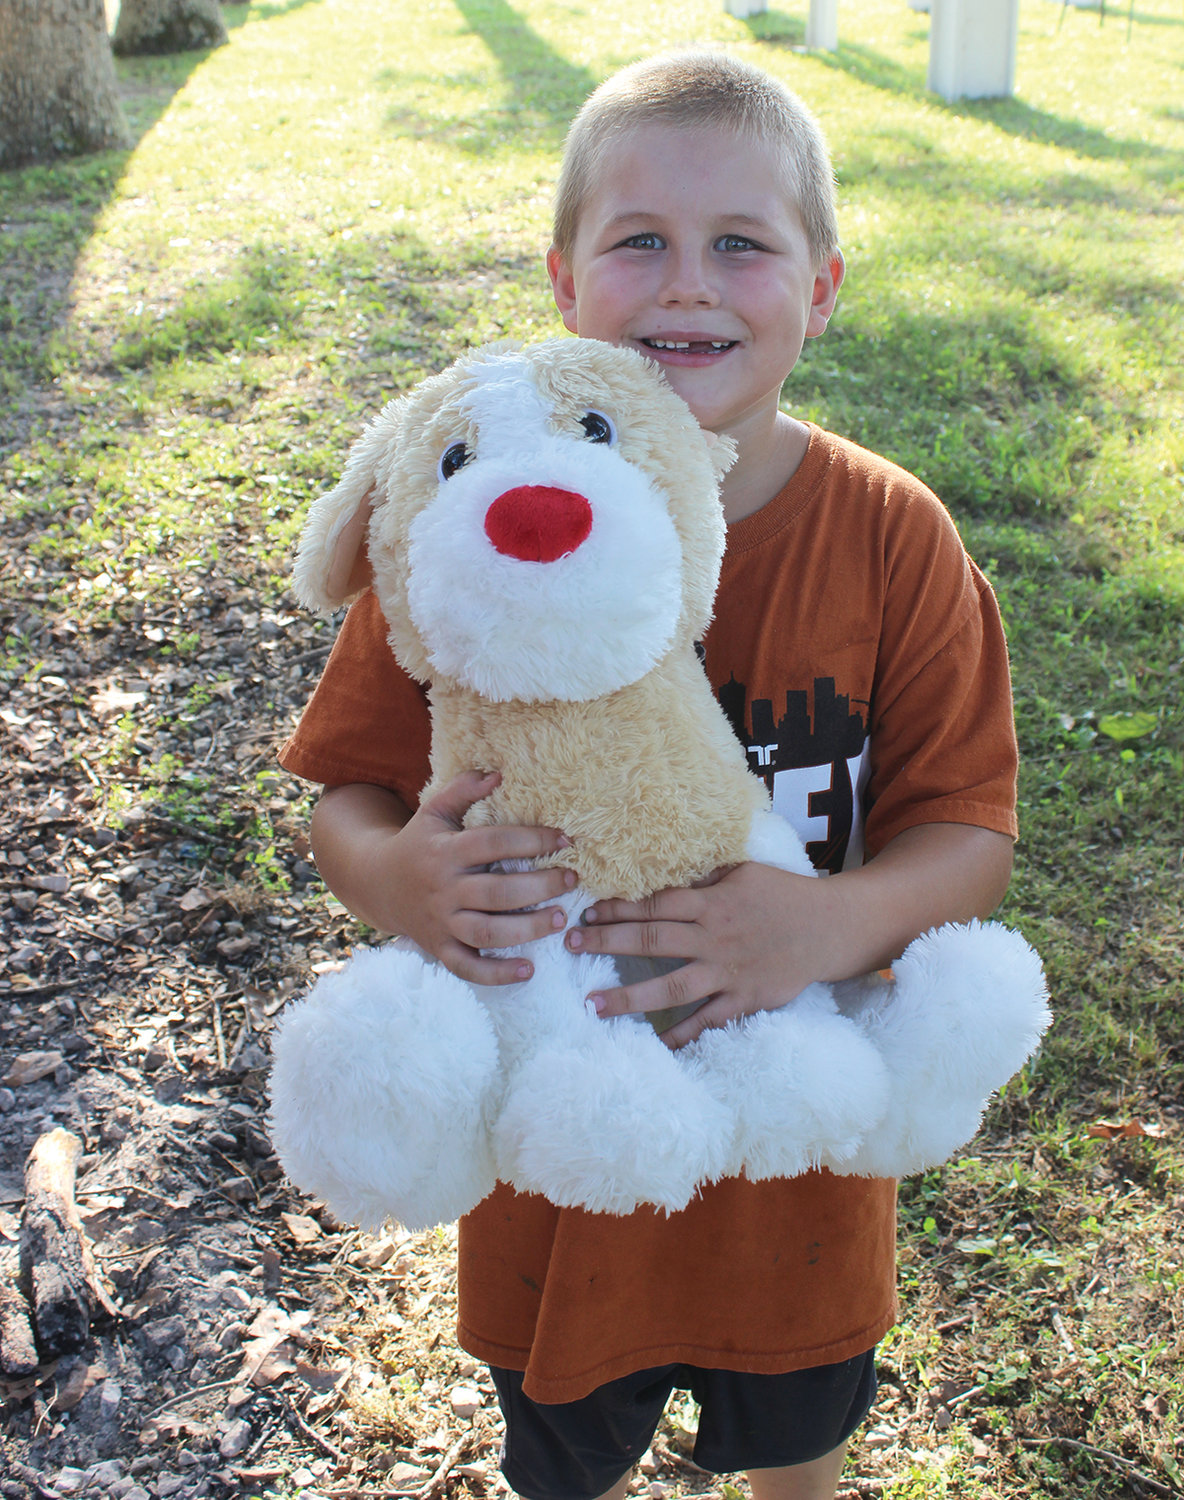 Eli Iott with the stuffed animal he won from playing a darts game.